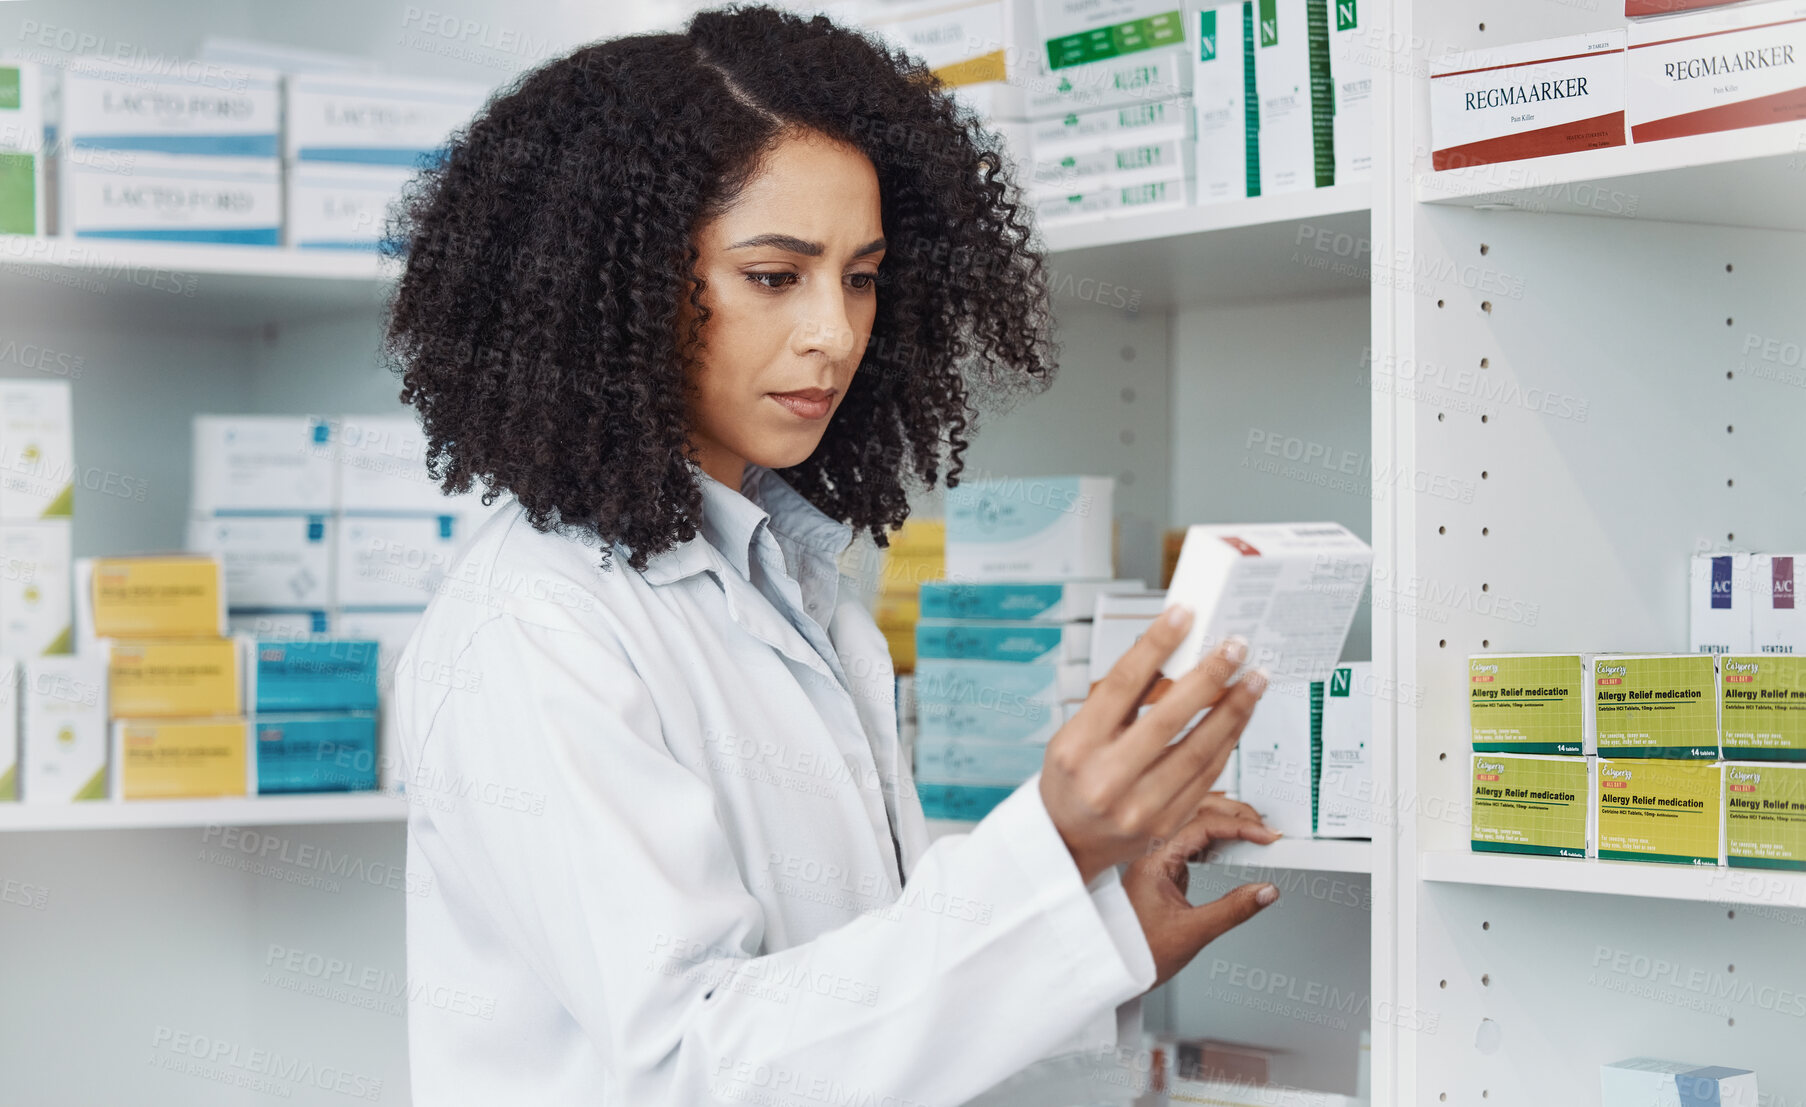 Buy stock photo Pharmacy, medicine and retail with woman in store for healthcare, drug dispensary and treatment prescription. Medical, pills and shopping with pharmacist for check, label information or product